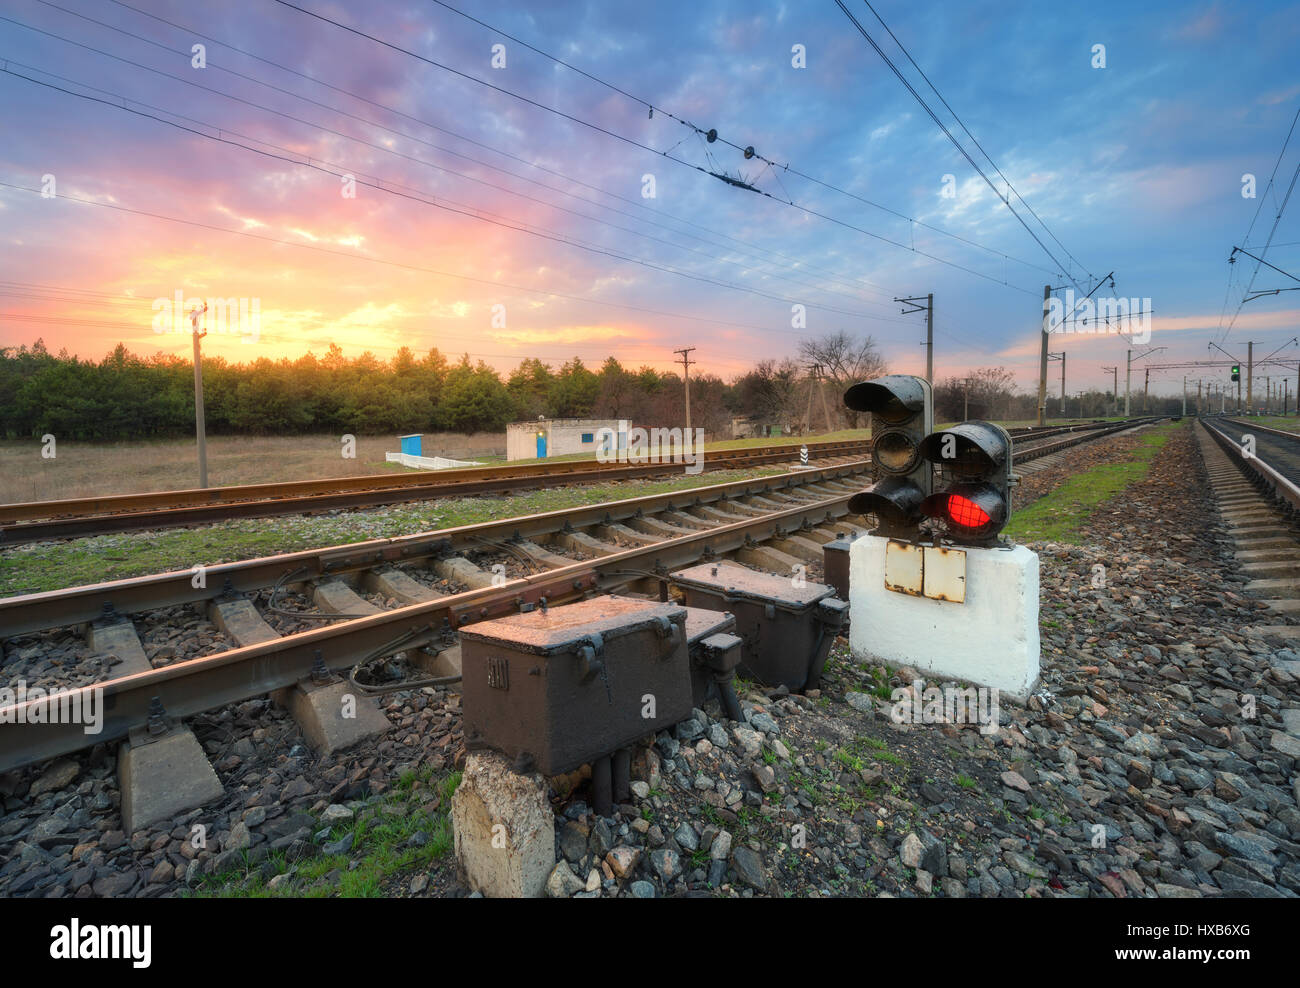 Railway station with semaphore and beautiful bright cloudy sky at sunset. Colorful industrial landscape. Railroad. Railway platform with traffic light Stock Photo